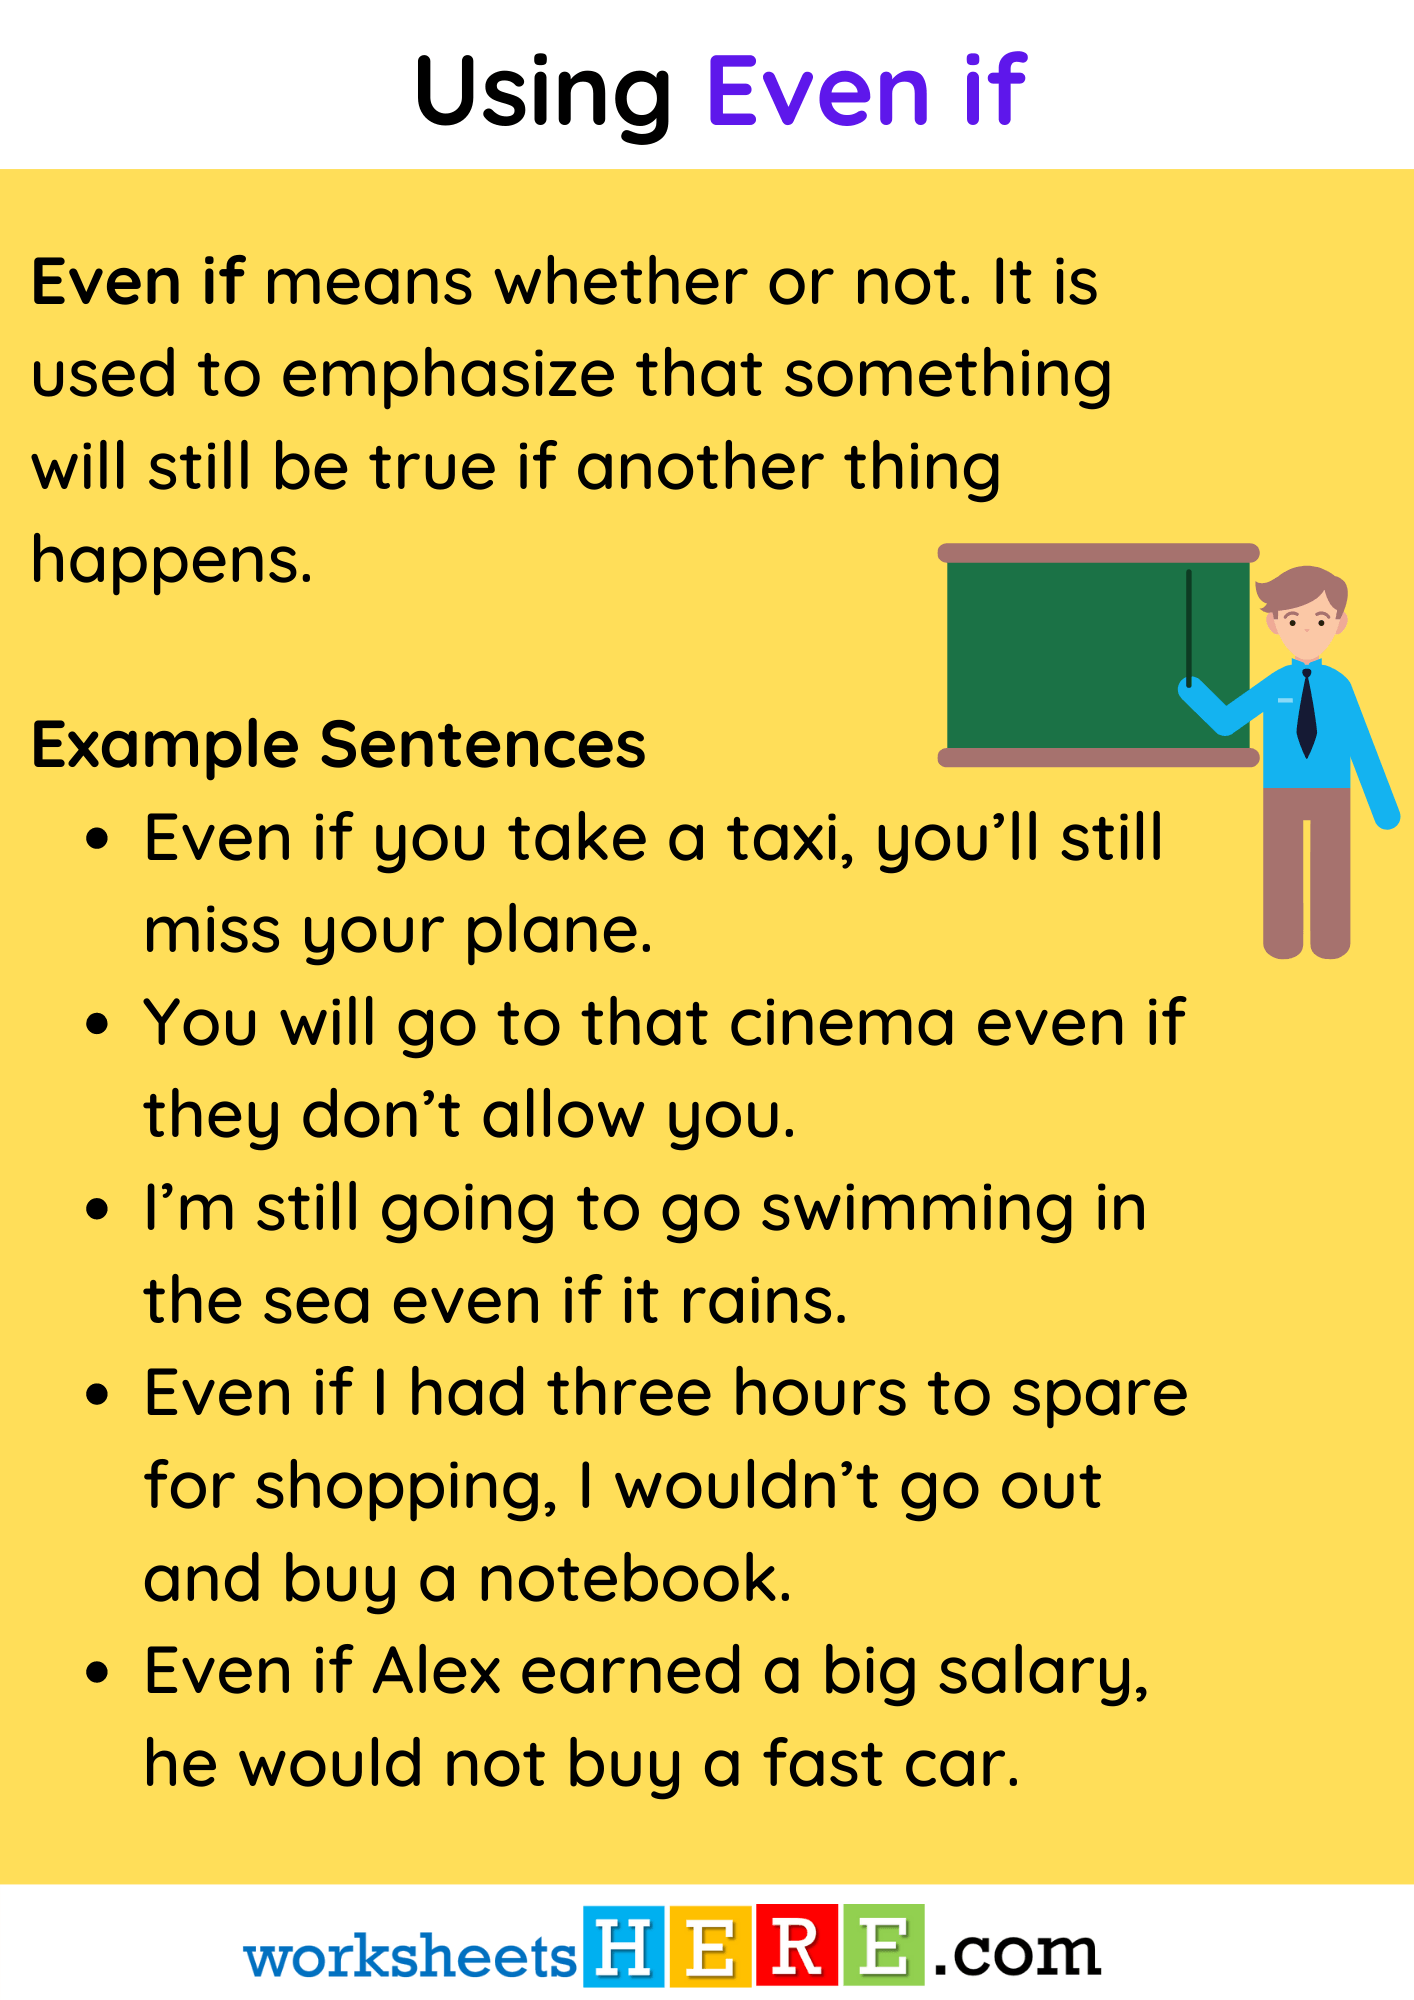 Using Even if, Definition and Example Sentences PDF Worksheet